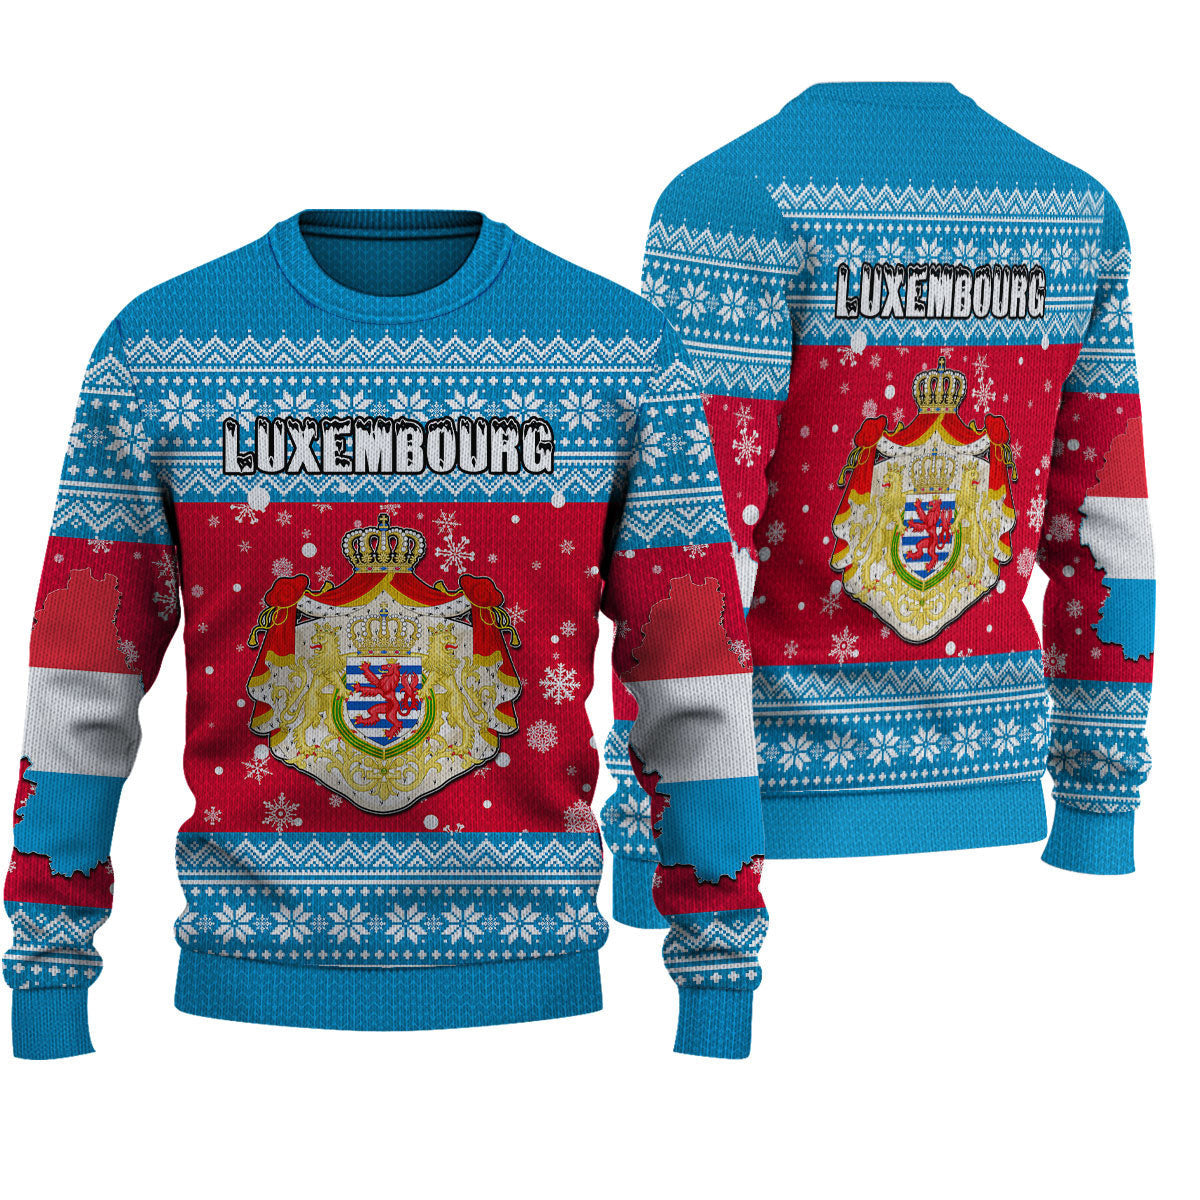 wonder-print-shop-ugly-sweater-luxembourg-christmas-knitted-sweater